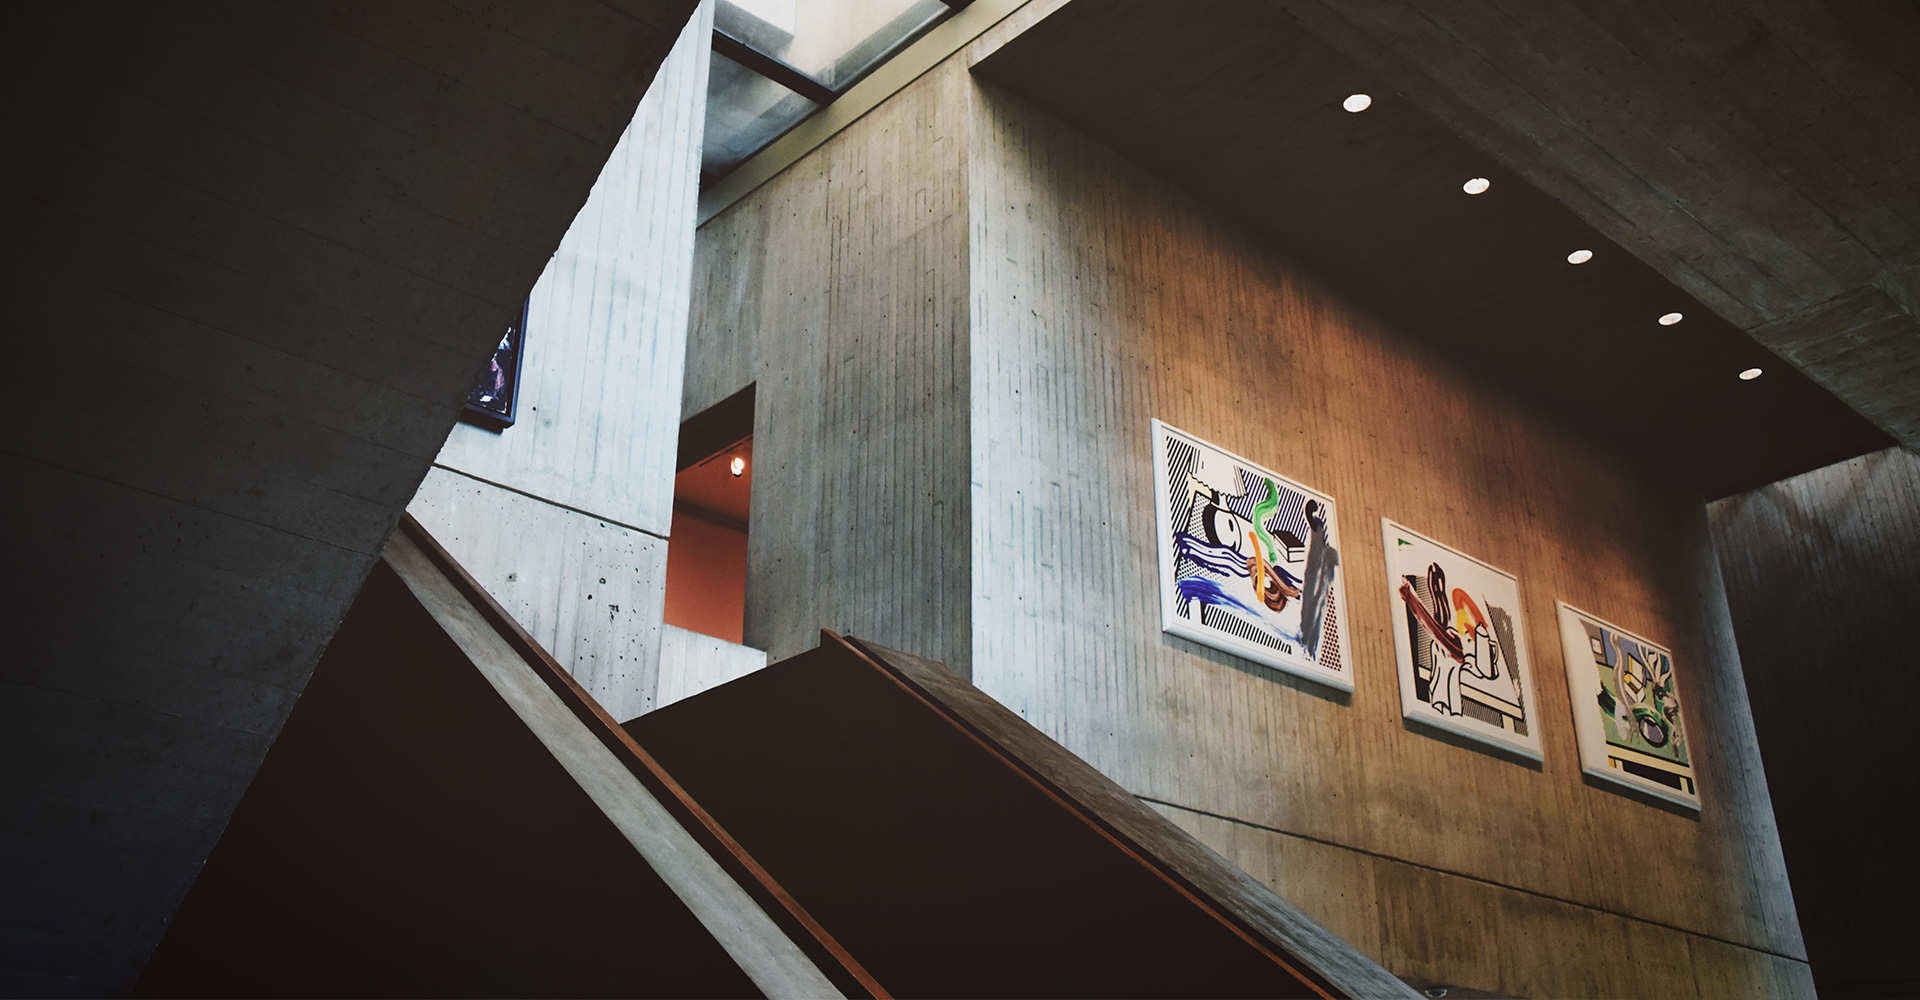 Stairwell in a modern building showcasing office branding through paintings on the wall.